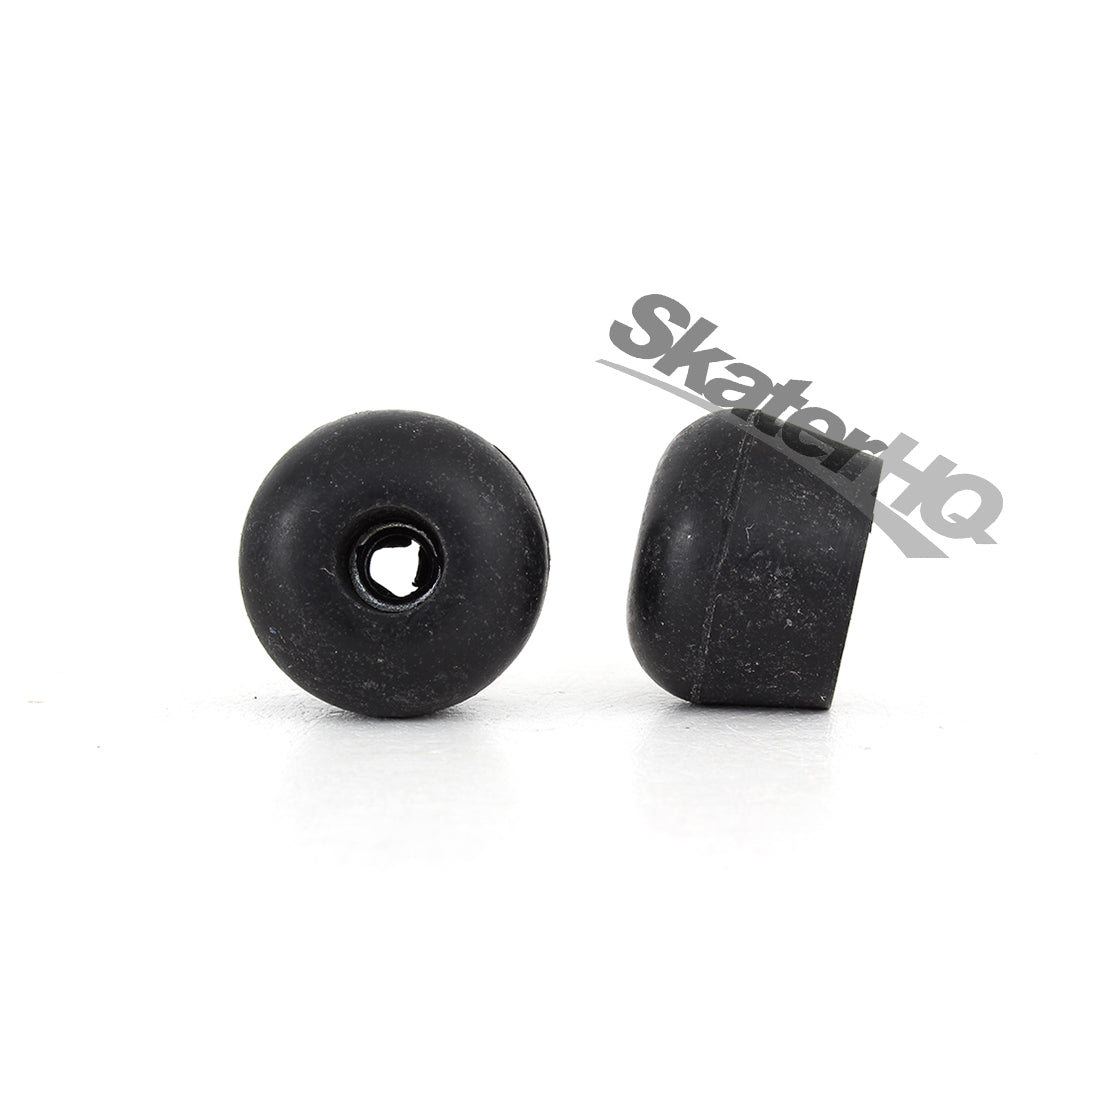 Sure-Grip Dance Toe Stops X Small PAIR - Black Roller Skate Hardware and Parts